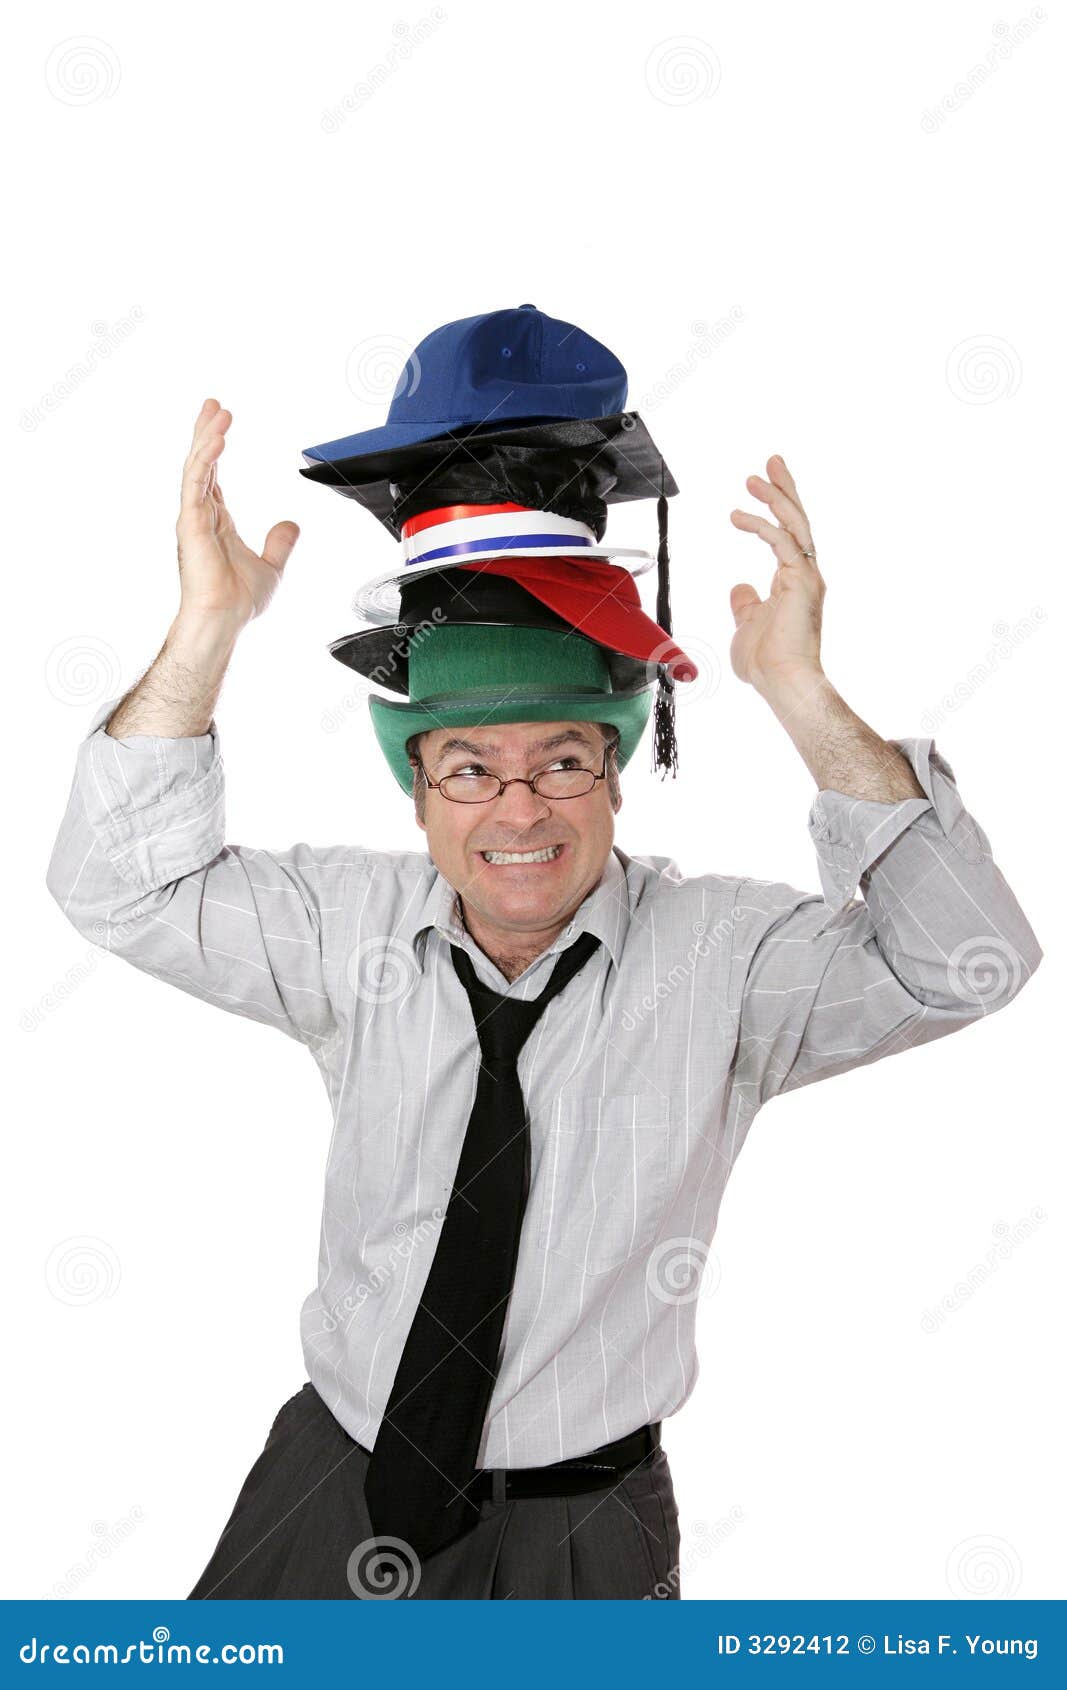 wearing too many hats